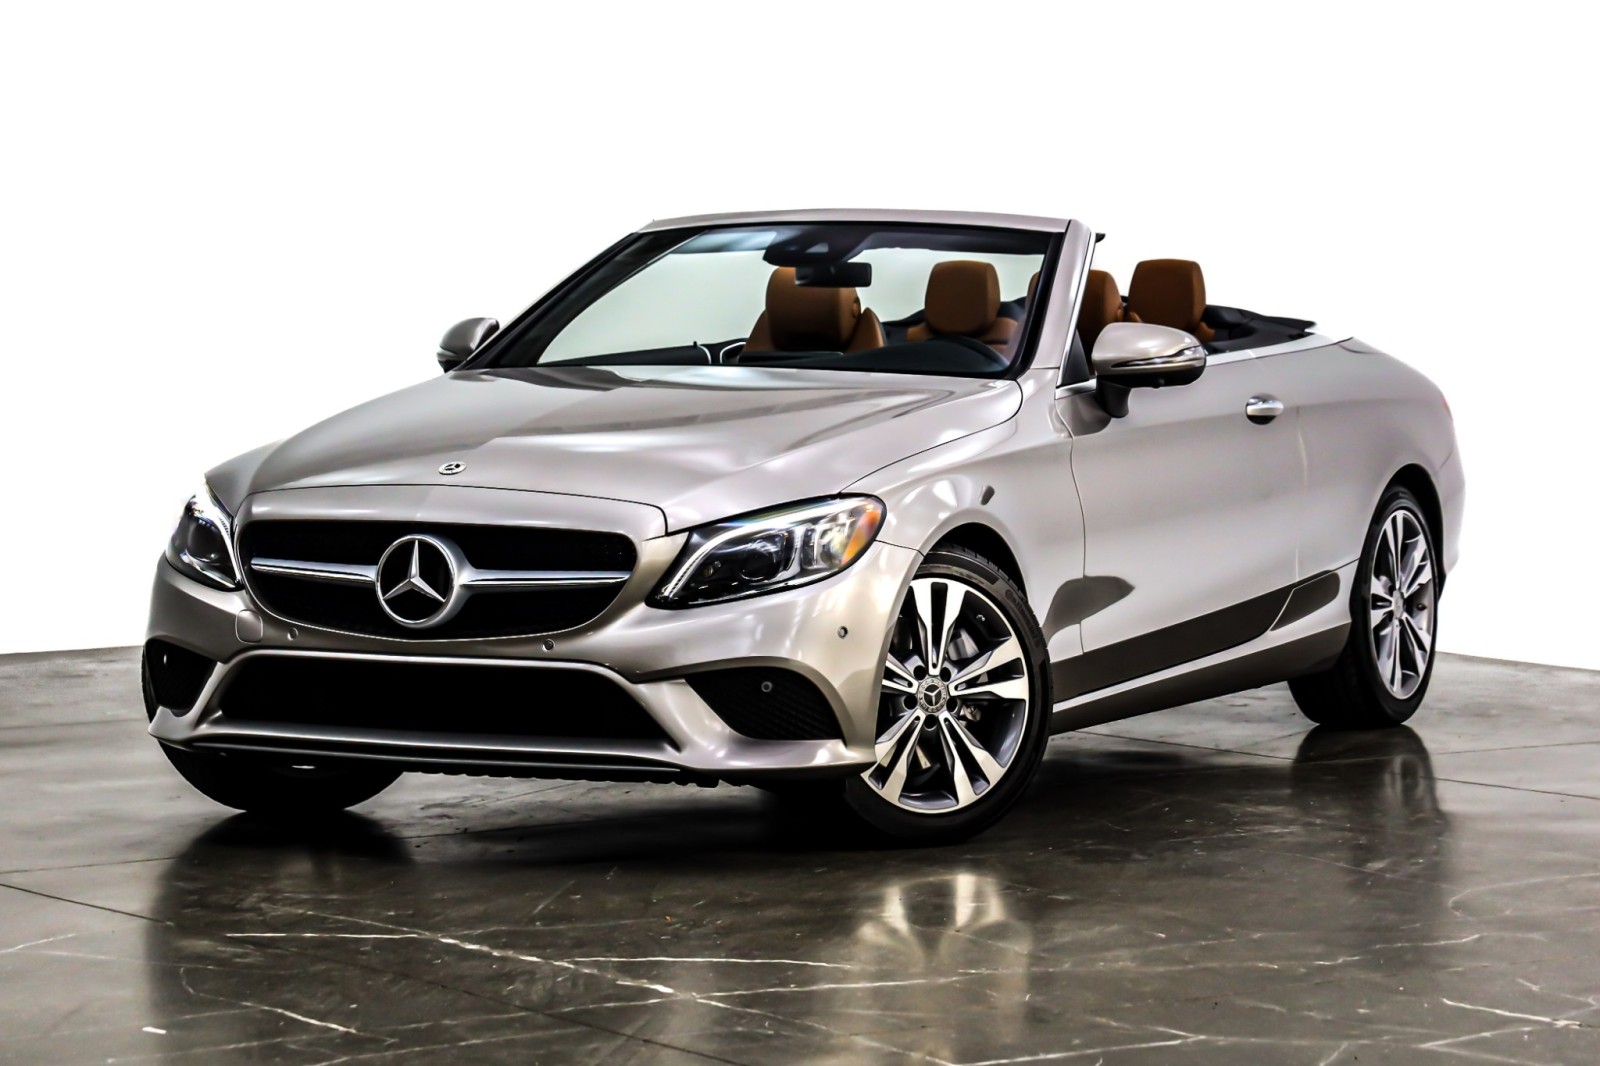 Find a full range of Convertibles for sale